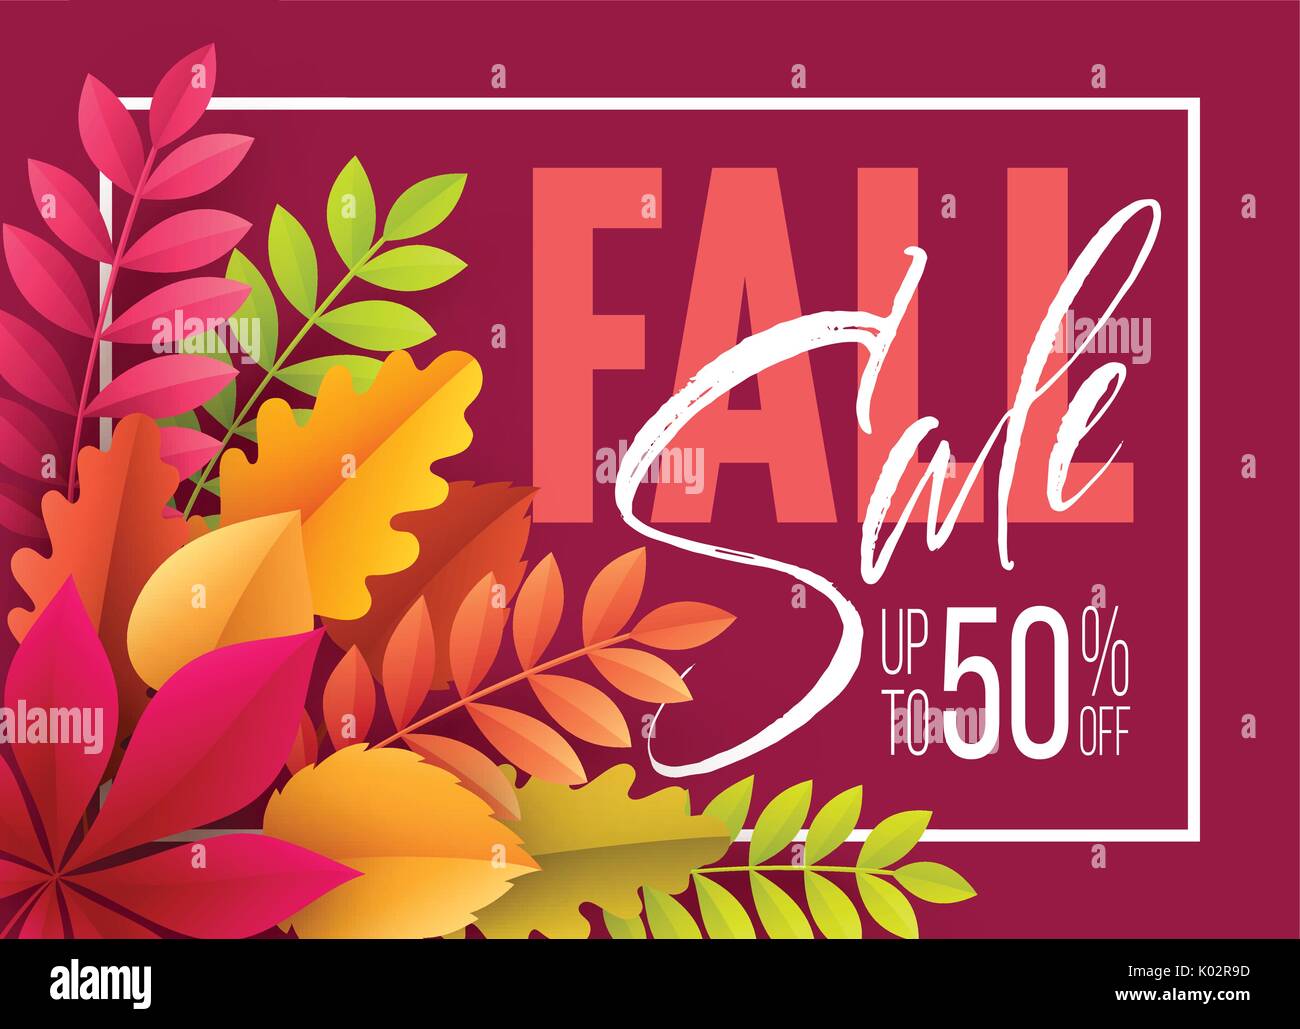 Autumn Sale background with Fall leaves. Vector illustration Stock Vector